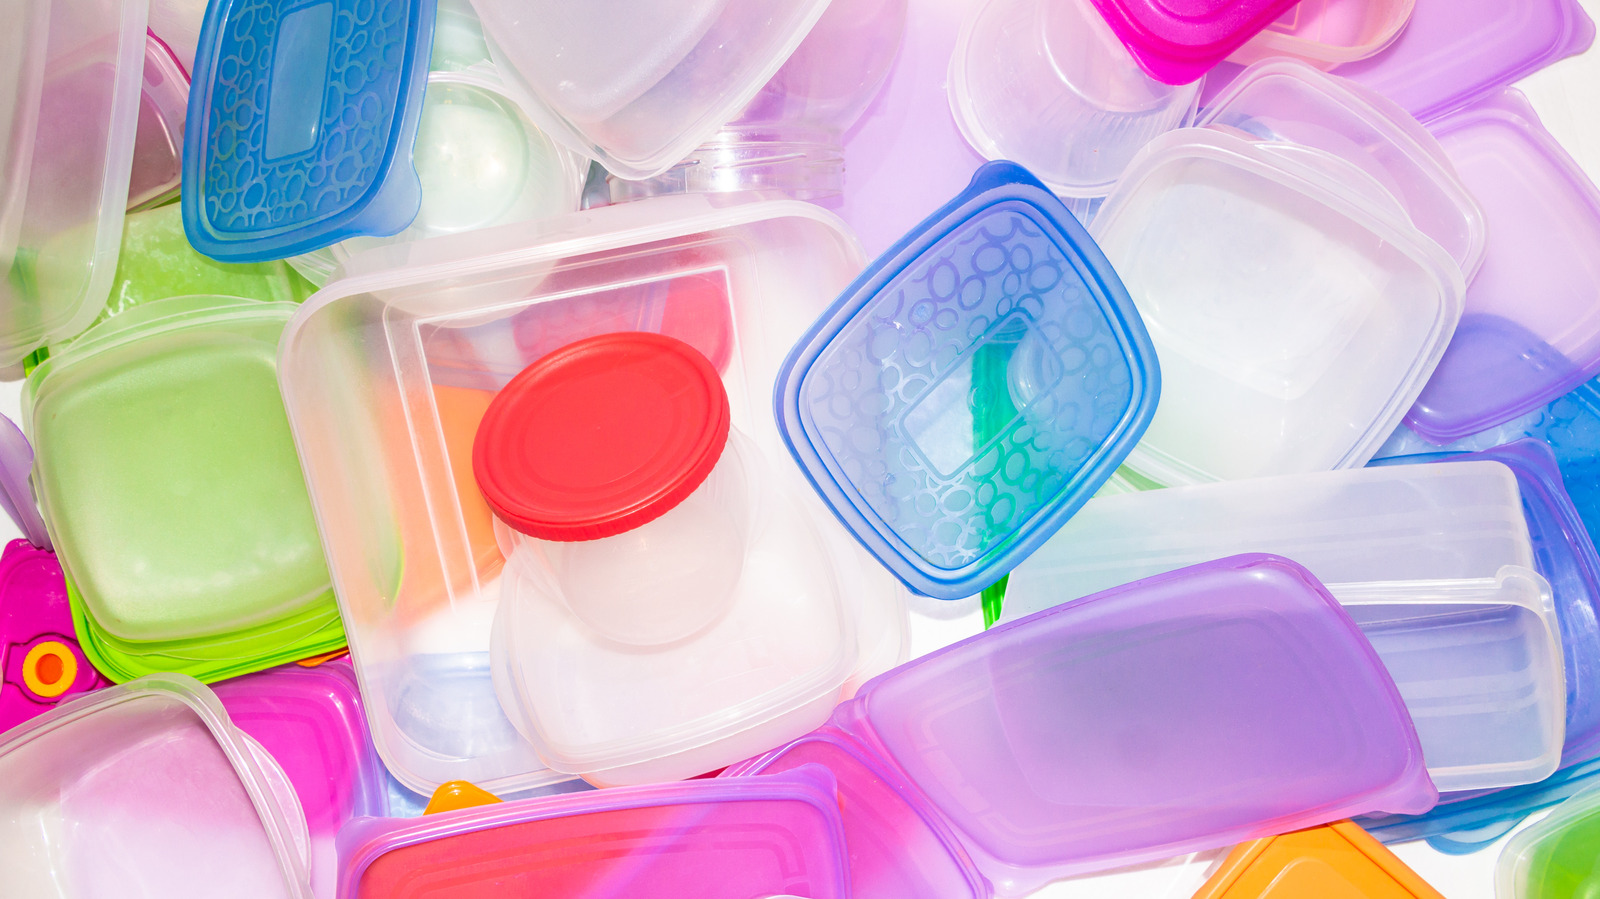 https://www.thedailymeal.com/img/gallery/the-recycling-hack-that-will-fix-your-smelly-tupperware/l-intro-1671379694.jpg